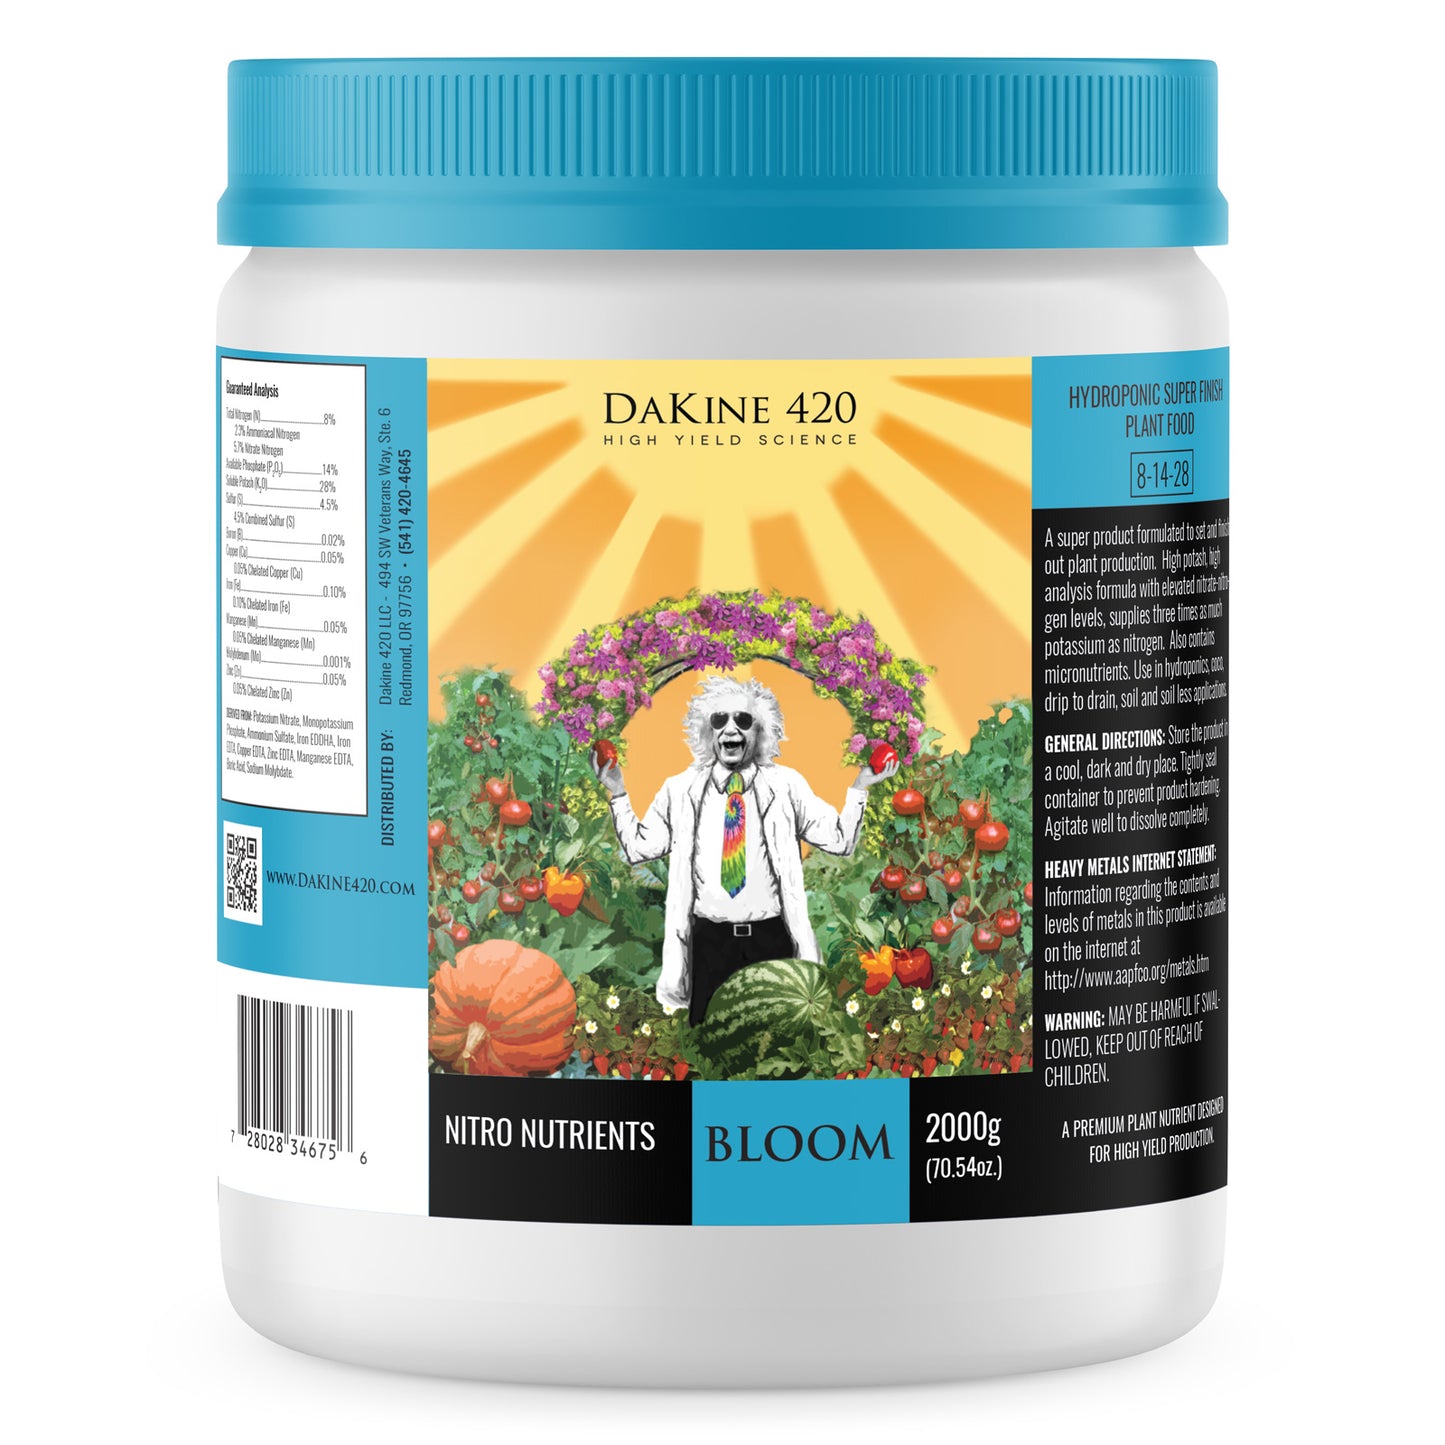 BLOOM rounds out the Nitro Nutrients trifecta of cannabis-growing excellence, with top-rated marijuana nutrients. Our super finishing formula supplies NPK in perfect balance (with 3 times more potassium than nitrogen)